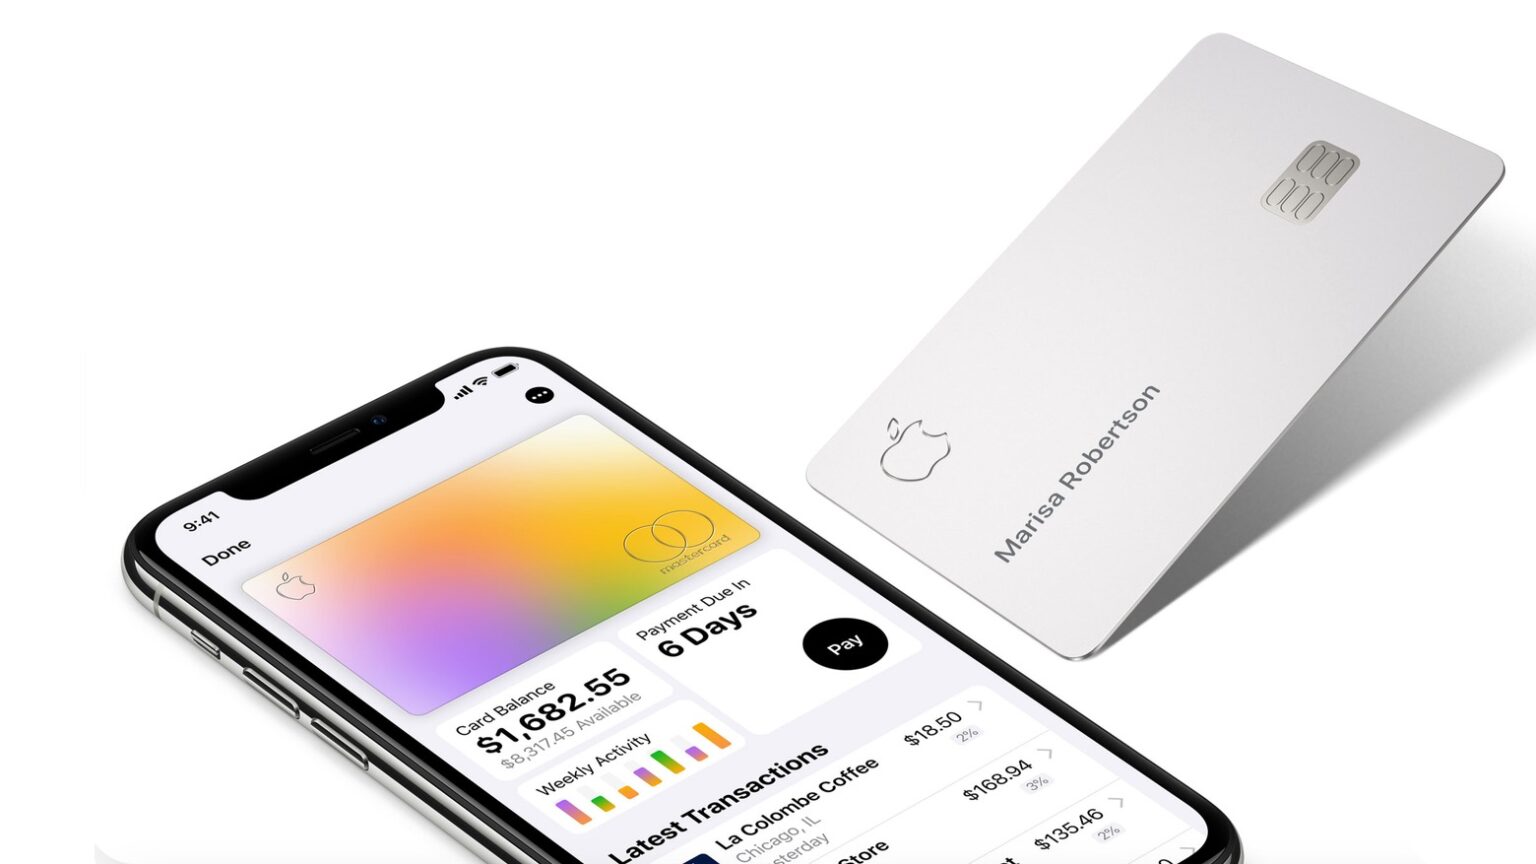 Apple Card works hand-in-hand with iPhone